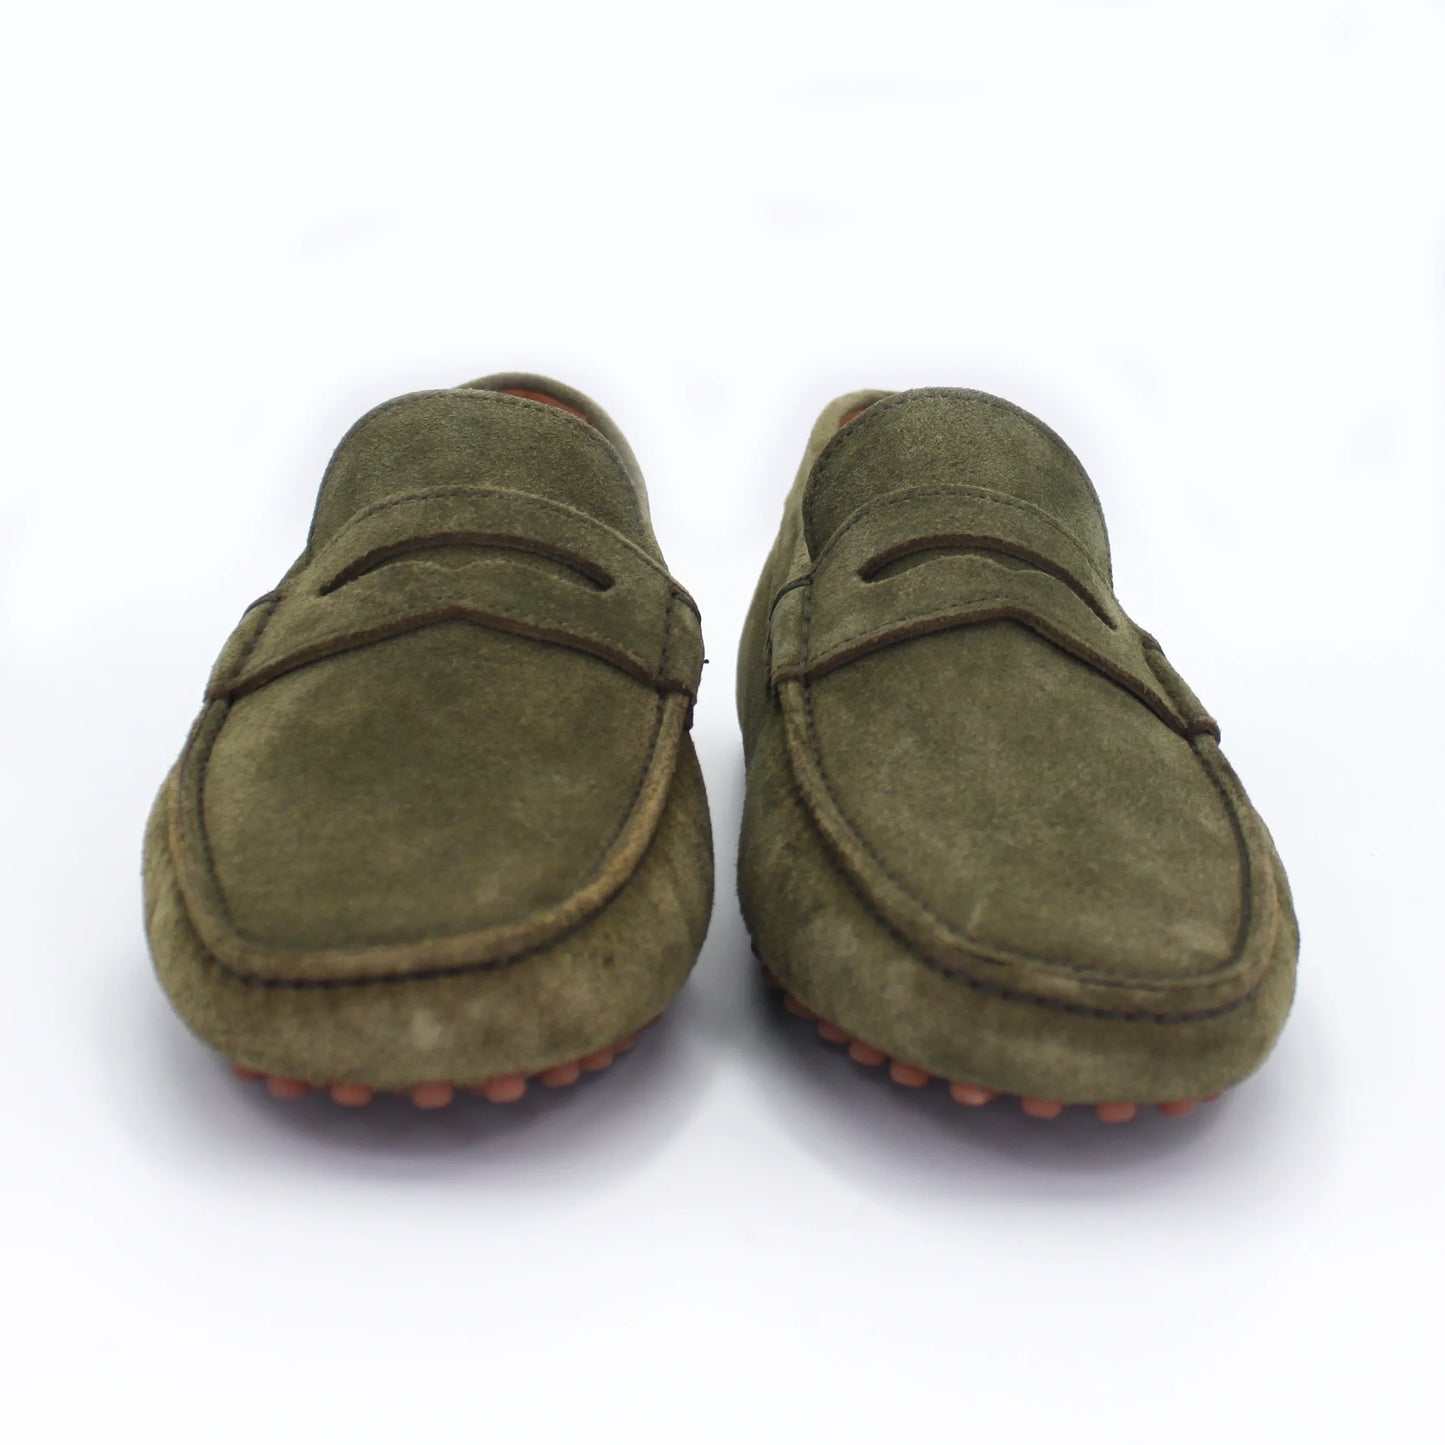 Shop Handmade Italian Suede Driver Moccasin in Asparago Green (u0460002) or browse our range of hand-made Italian moccasins, loafers and drivers for men in leather or suede in-store at Aliverti Durban or Cape Town, or shop online. We deliver in South Africa & offer multiple payment plans as well as accept multiple safe & secure payment methods.